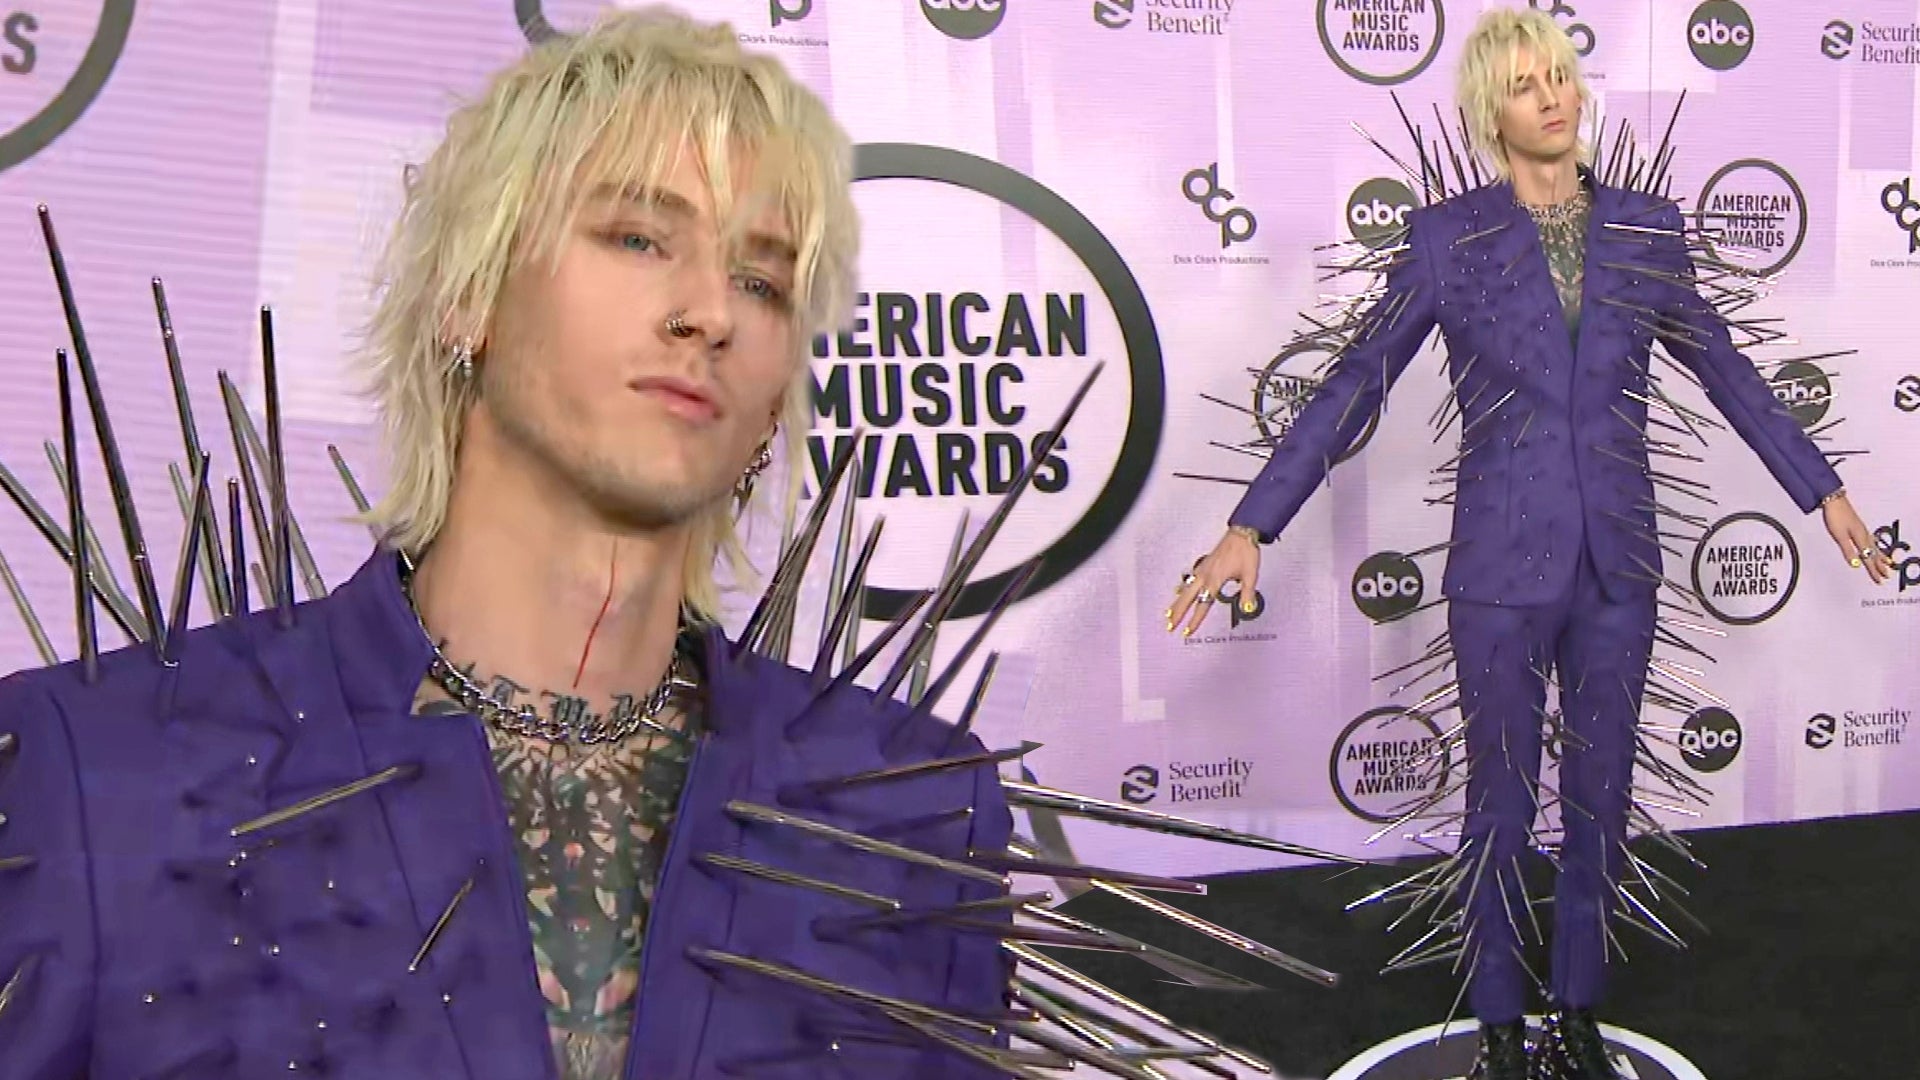 Machine Gun Kelly Makes AMA Red Carpet Appearance Covered in Metal Spikes